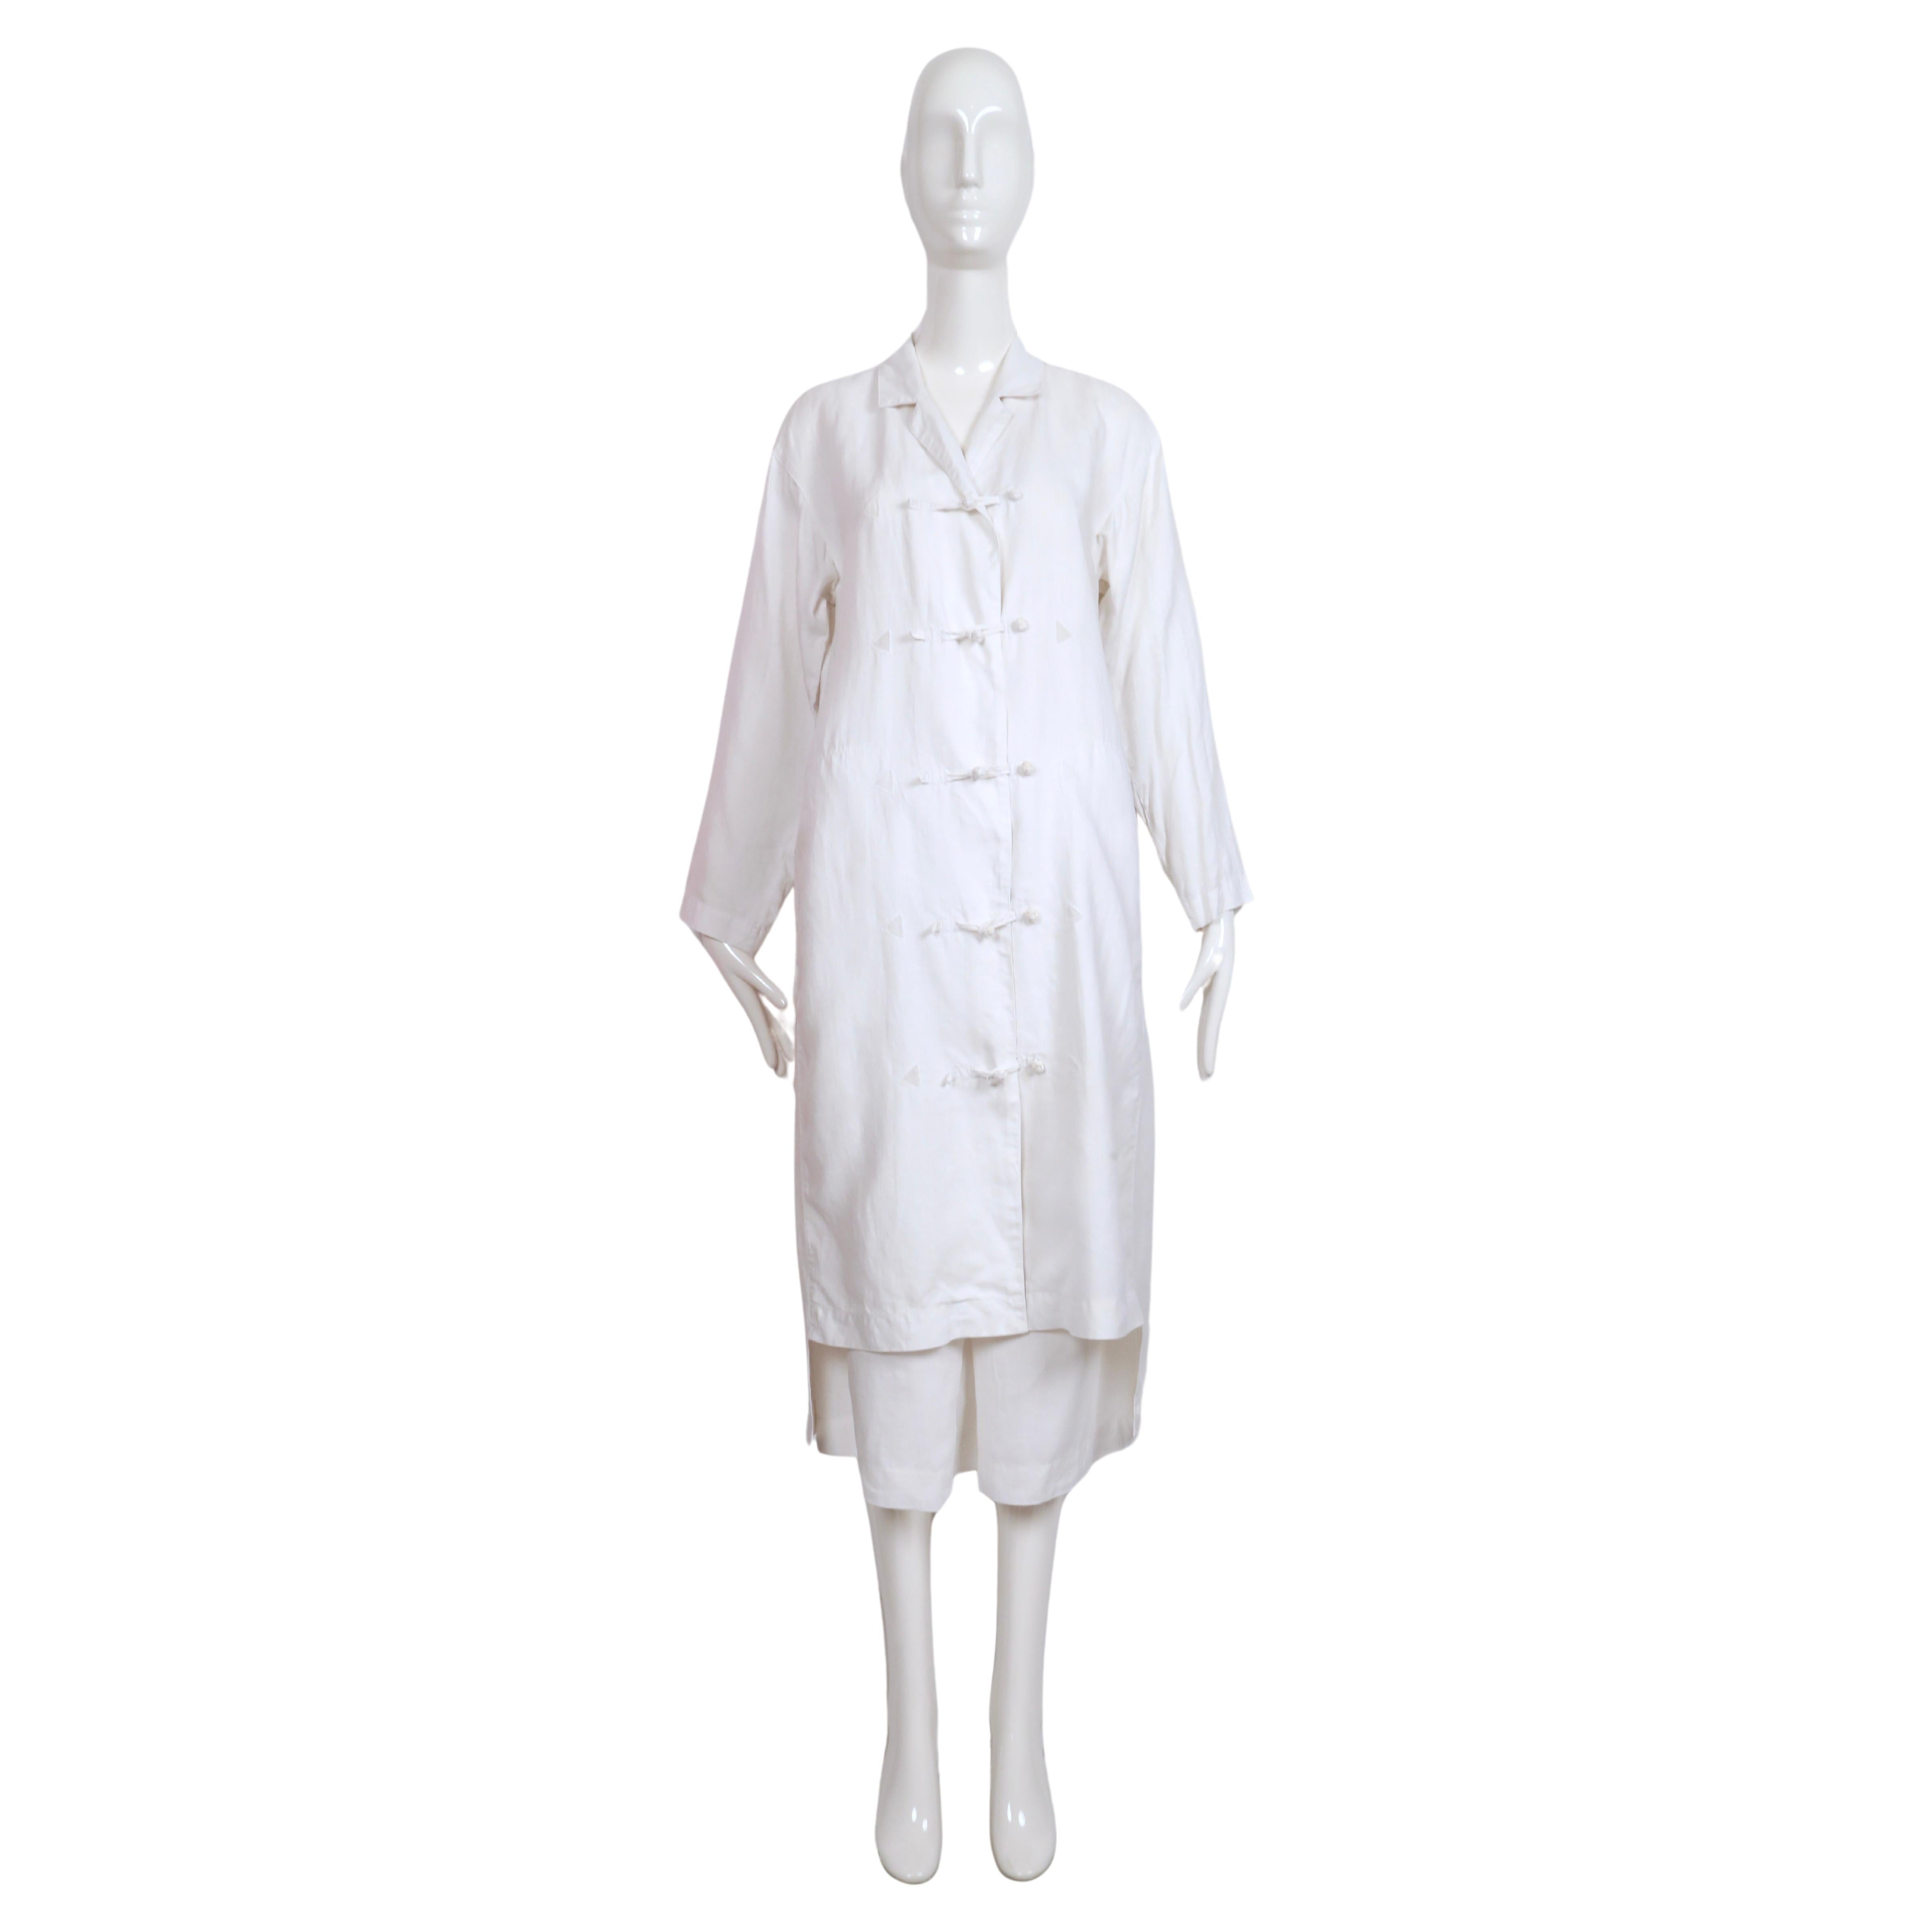 Stunning white, linen duster jacket and matching skirt with knotted button closure and sheer triangular inserts designed by Issey Miyake dating to the 1980's. Jacket has a a very unique cut at hem to show the skirt from front but conceal it from the